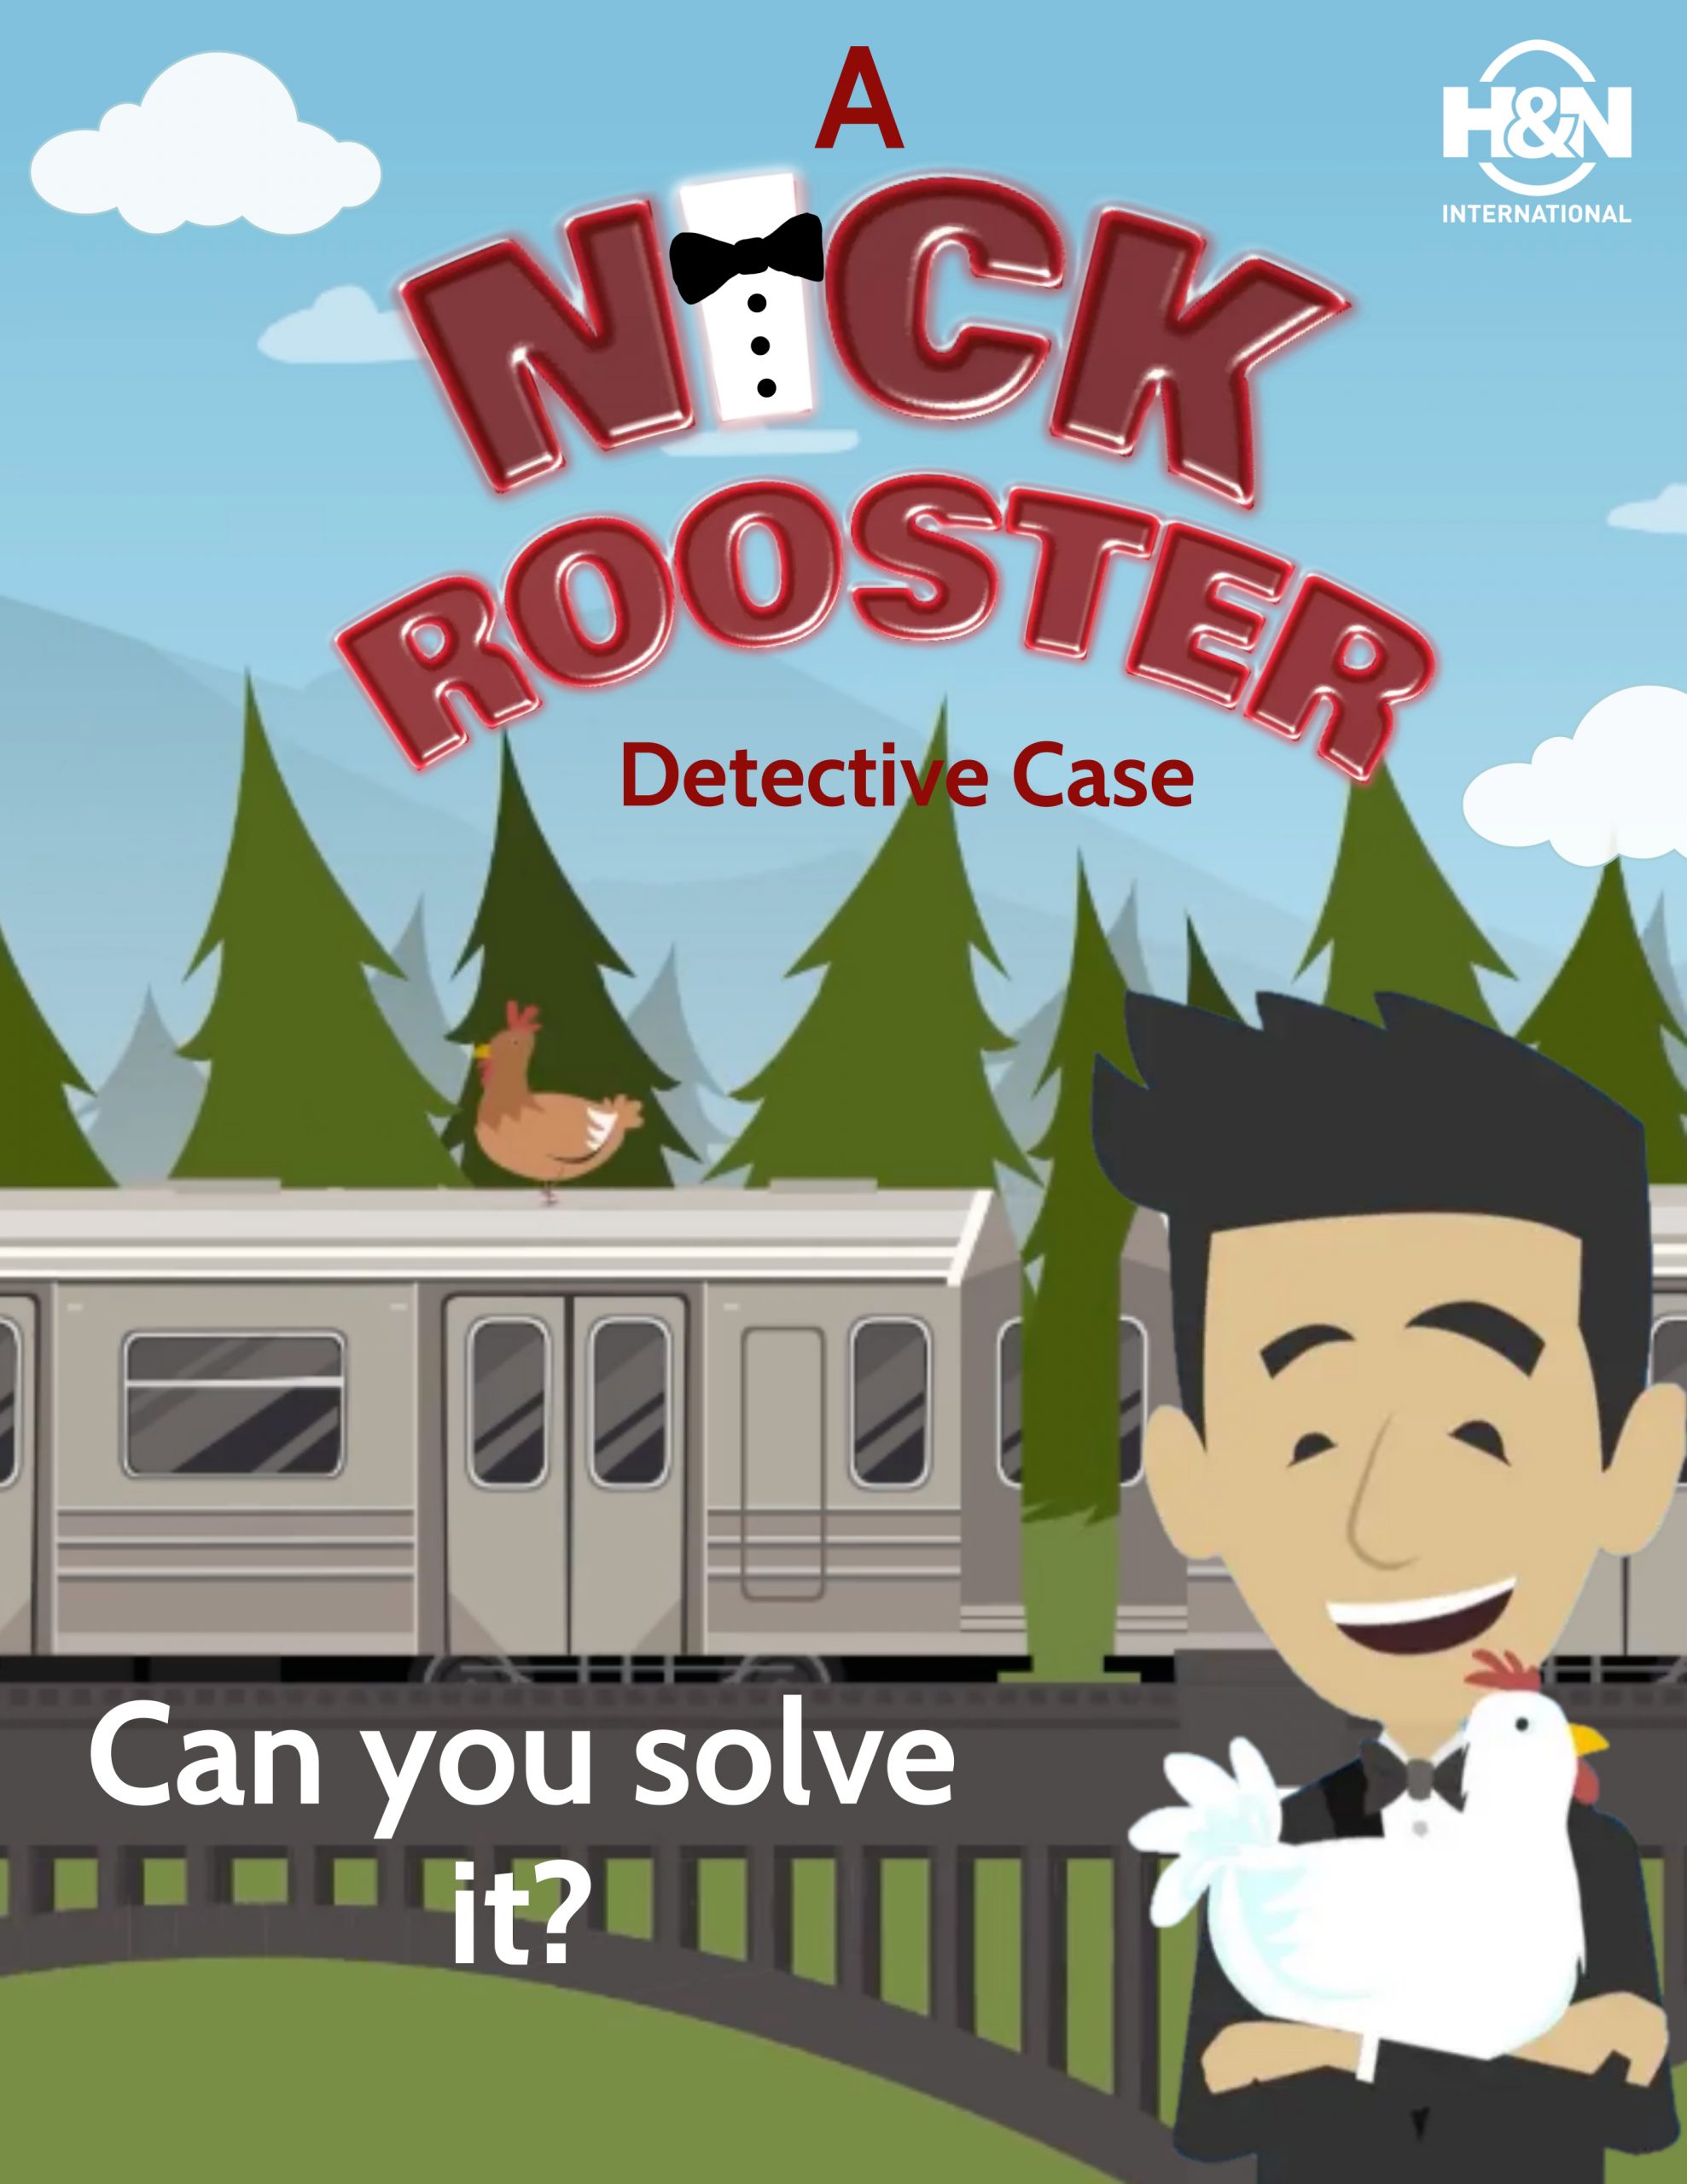 Nick Rooster case no. 9